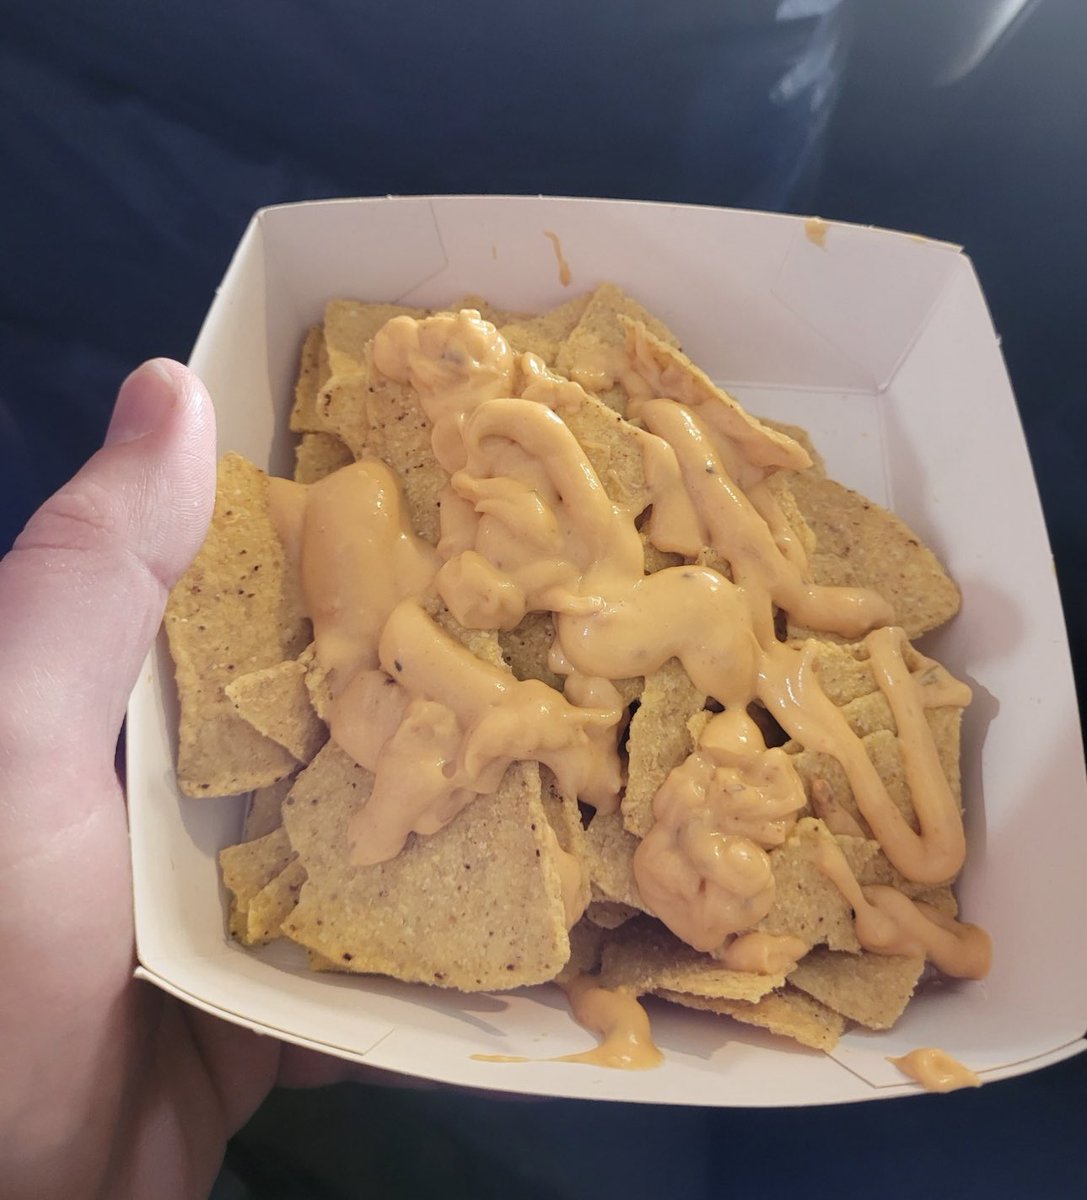 Nachos at the Scottish Cup Semi Final between Rangers and Hearts (@ScottishCup) 💷 £4.50